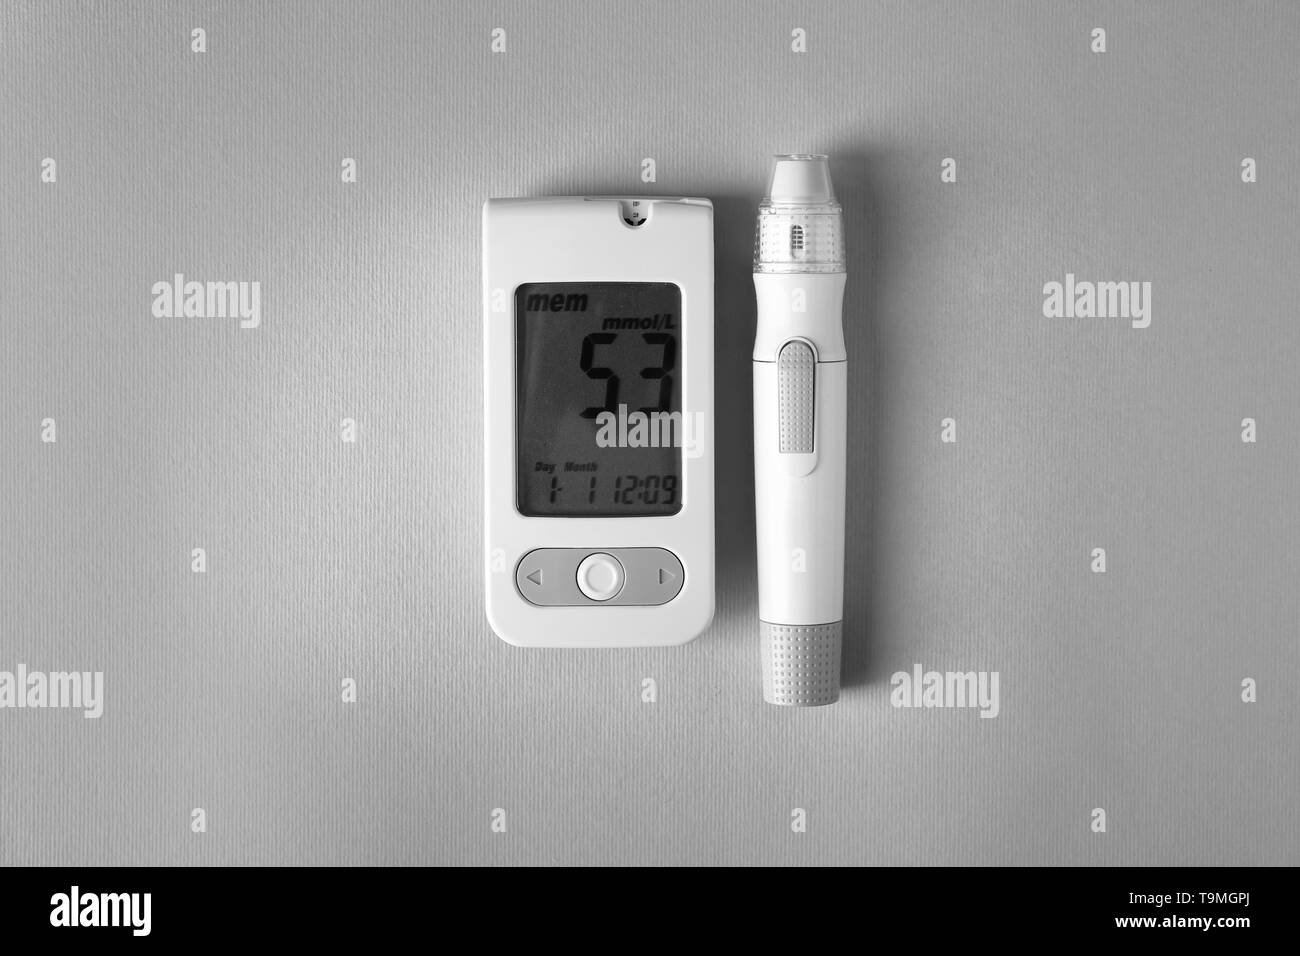 Digital glucometer with lancet pen on grey background. Diabetes control Stock Photo